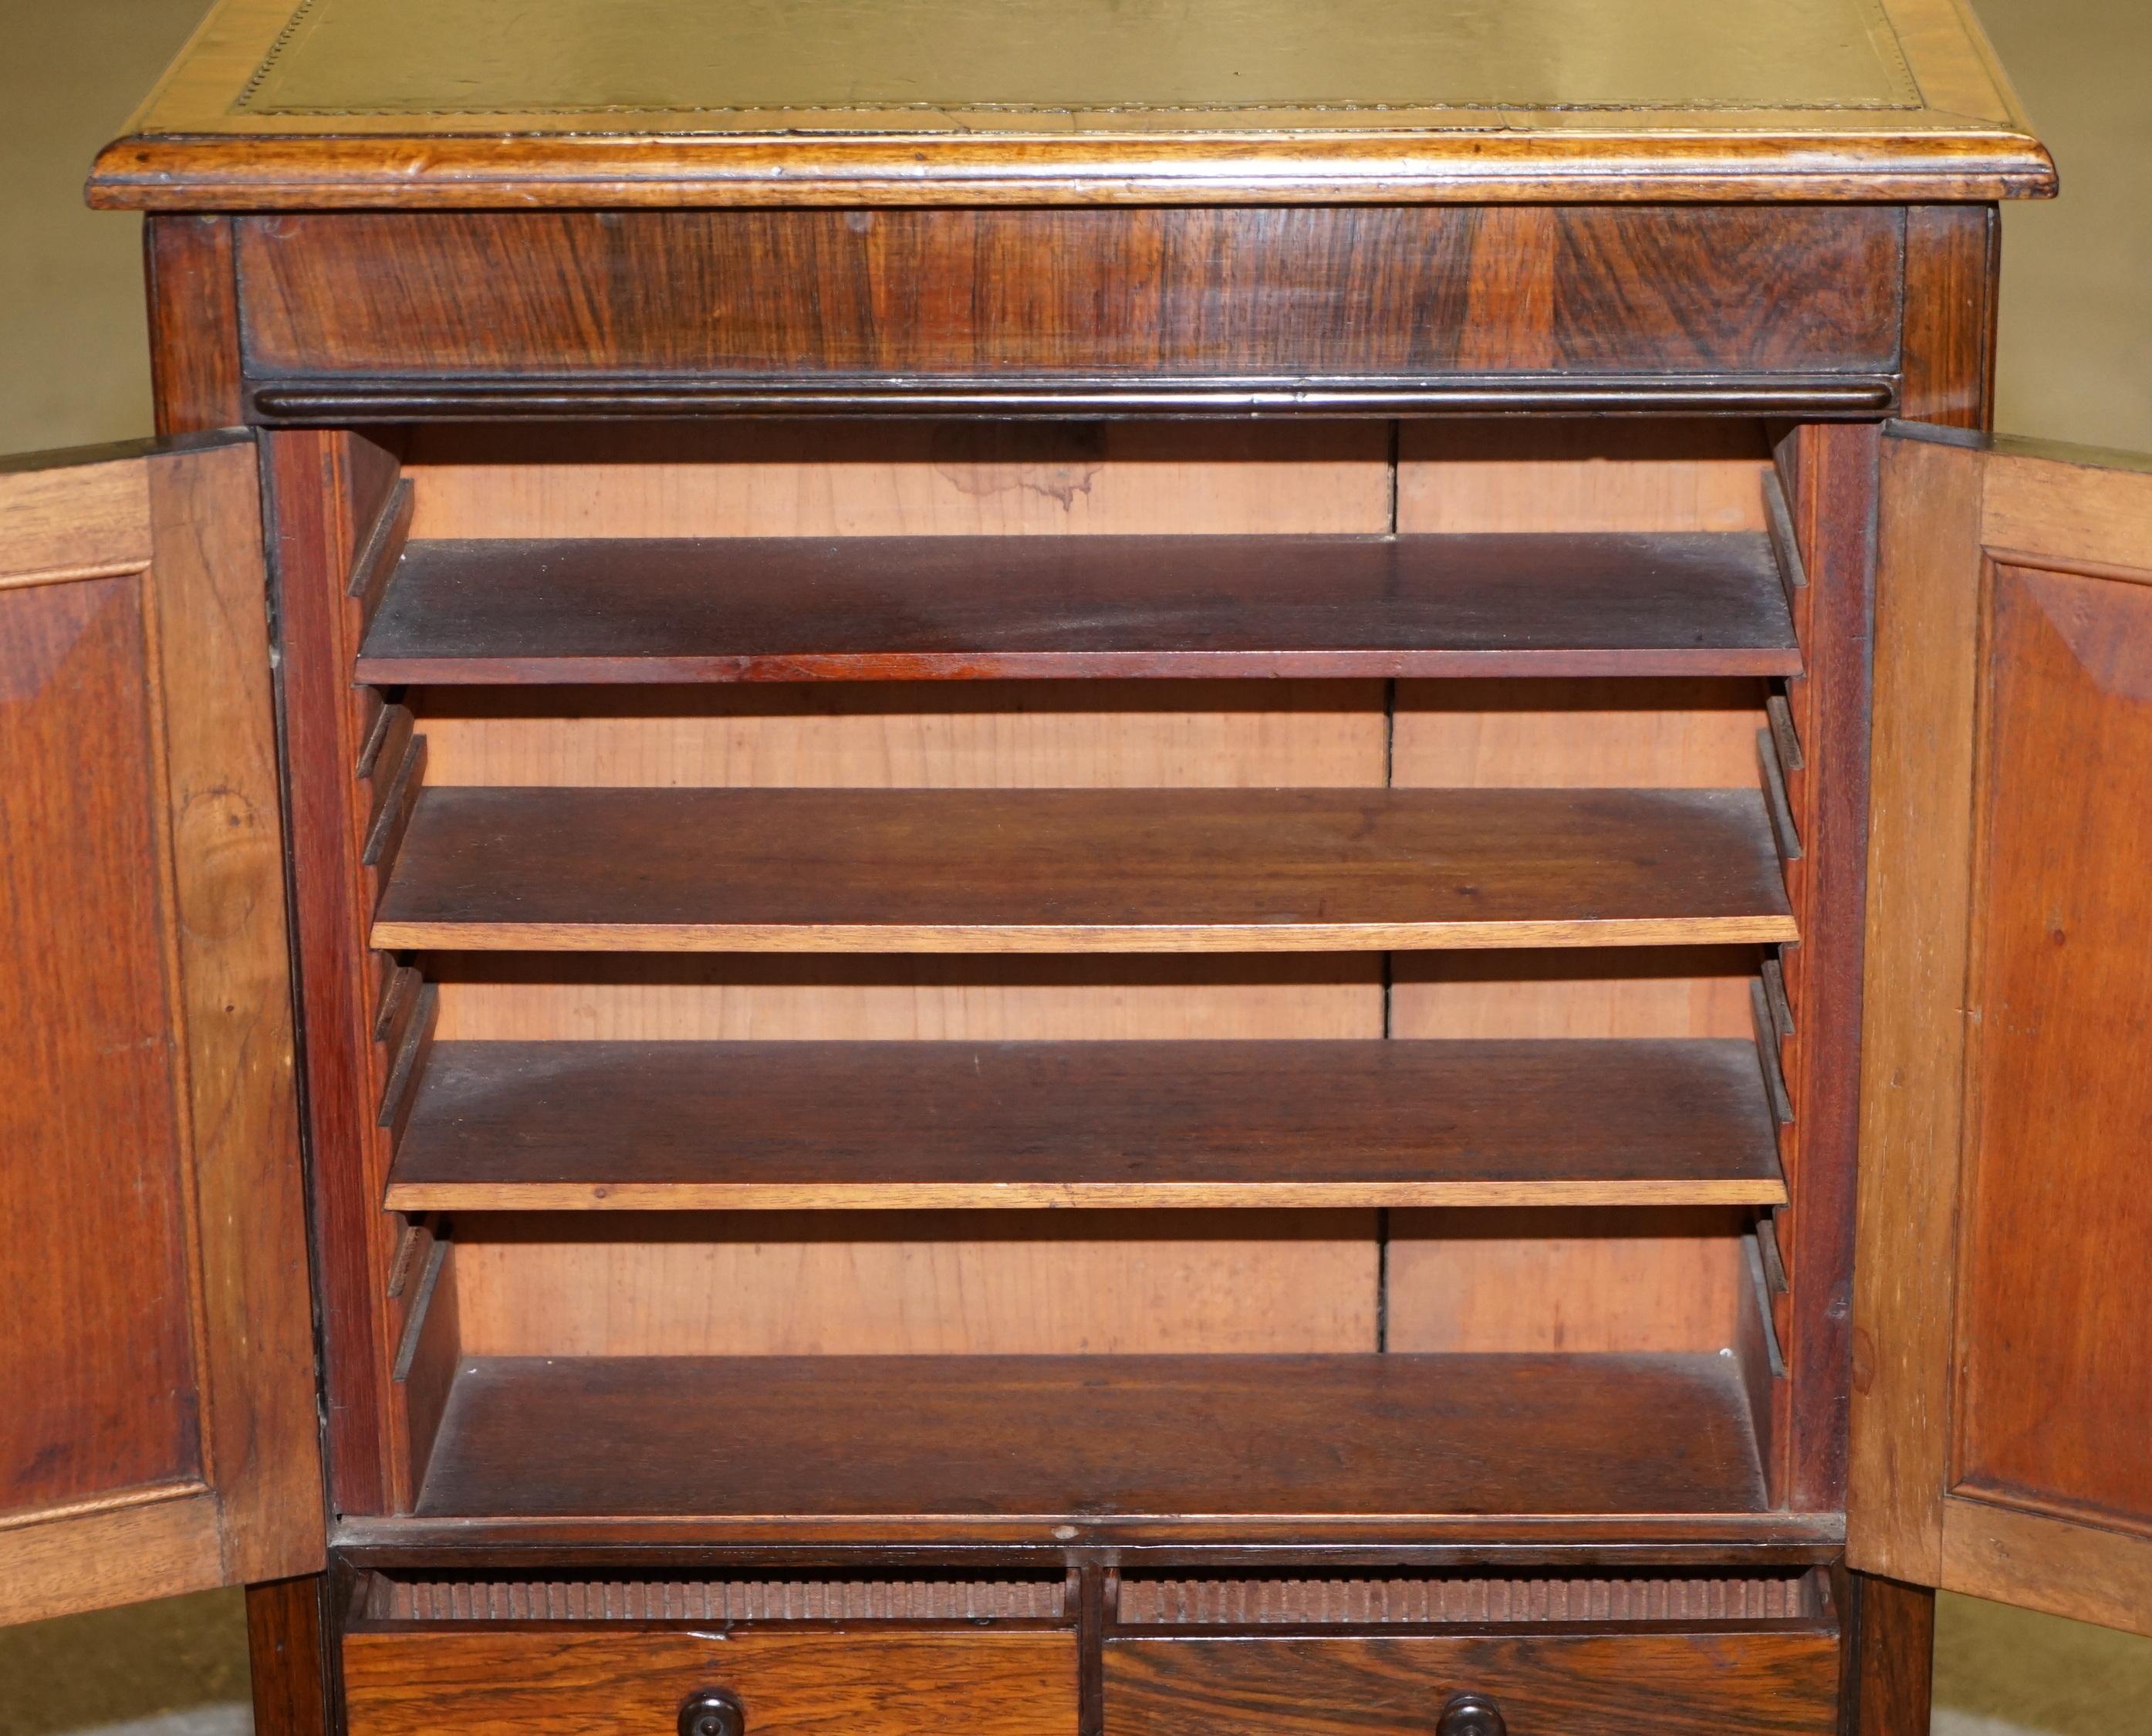 RARE WILLIAM IV CIRCA 1830 HARDWOOD LIBRARY FOLIO CABiNET WITH DRAWERS BOOKCASE For Sale 6